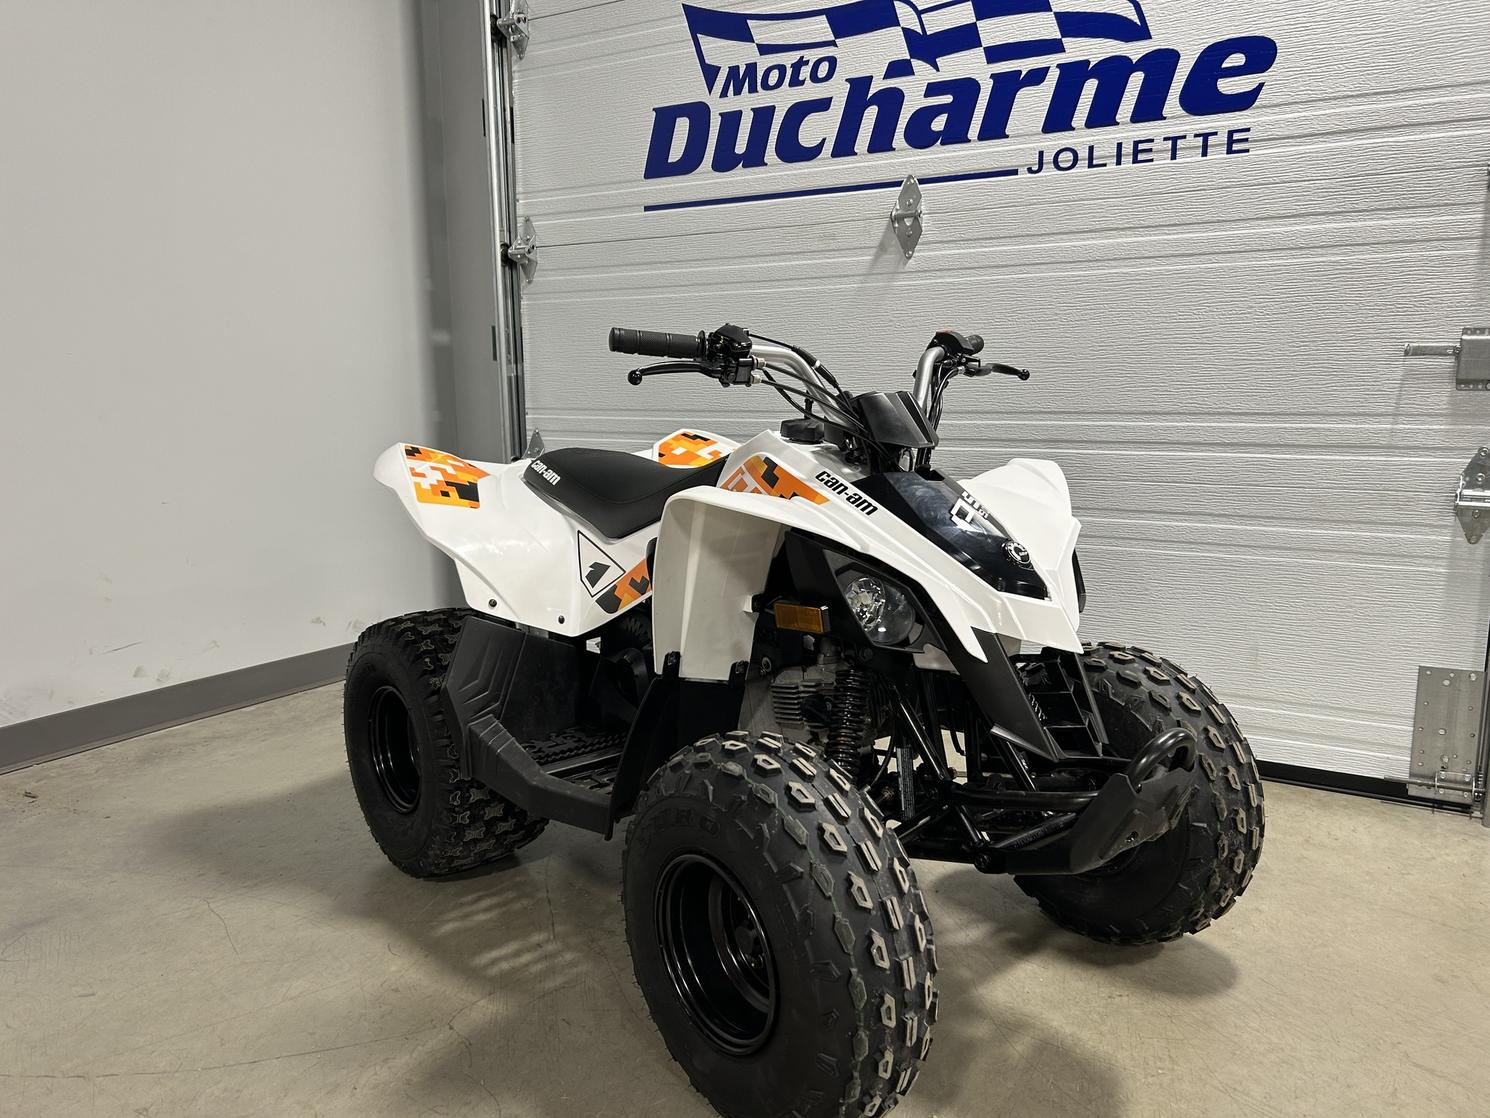 Can-Am DS 90 2022